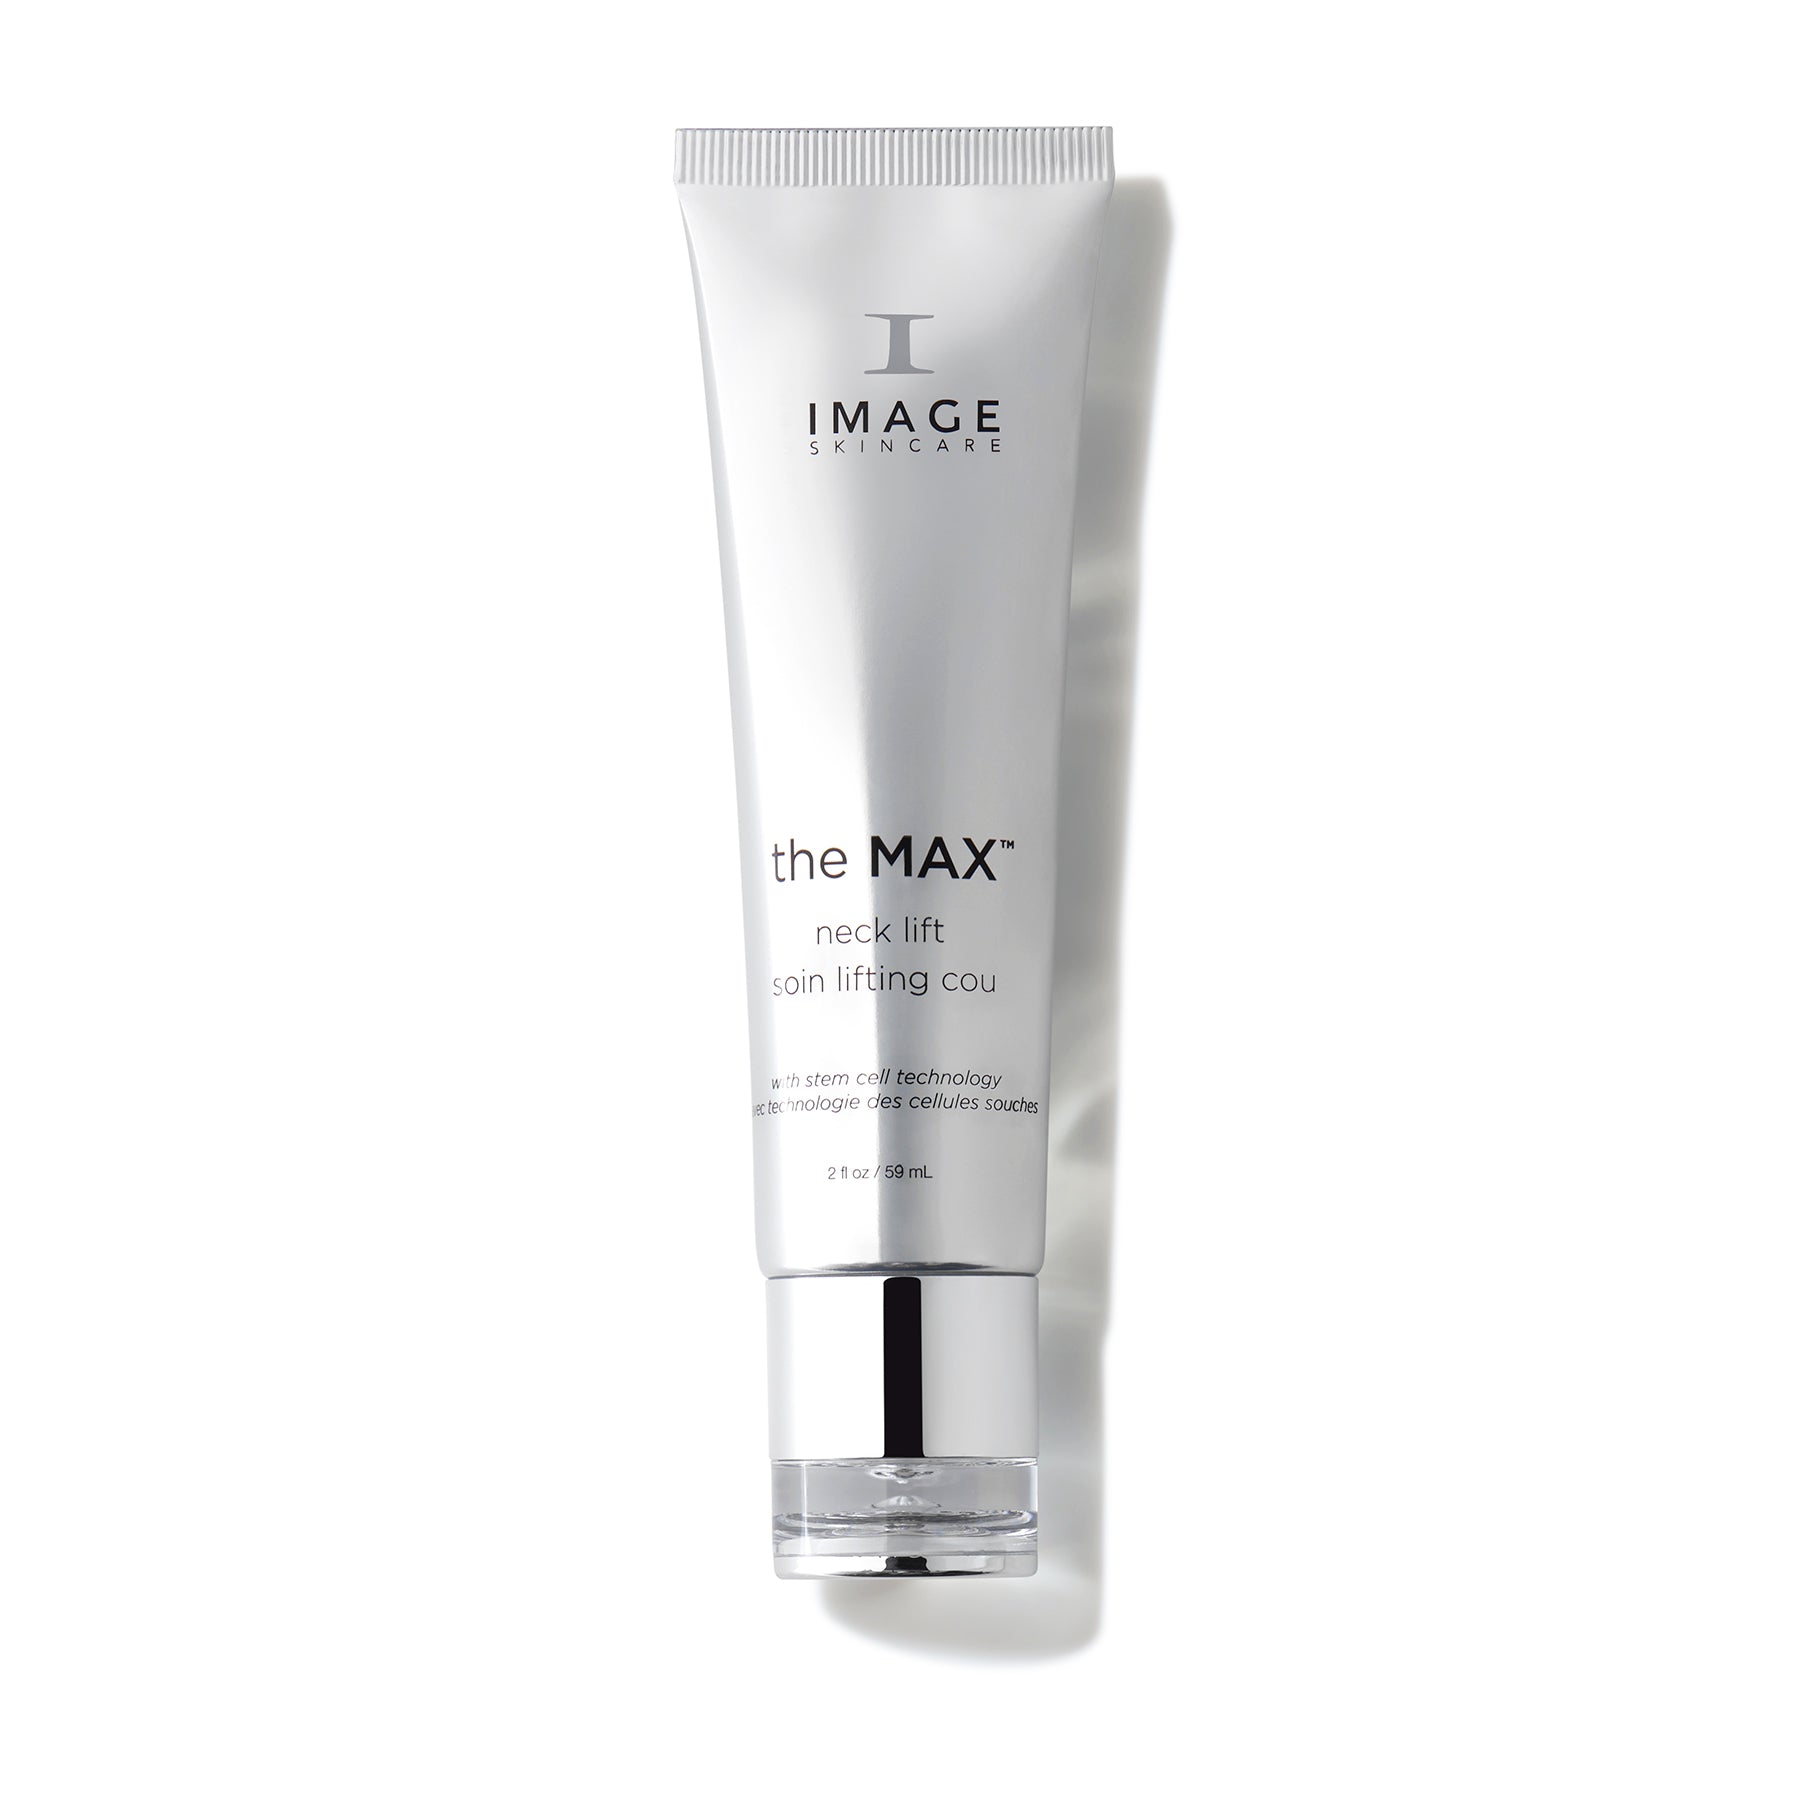 Image Skincare The Max Neck Lift Shop At Exclusive Beauty